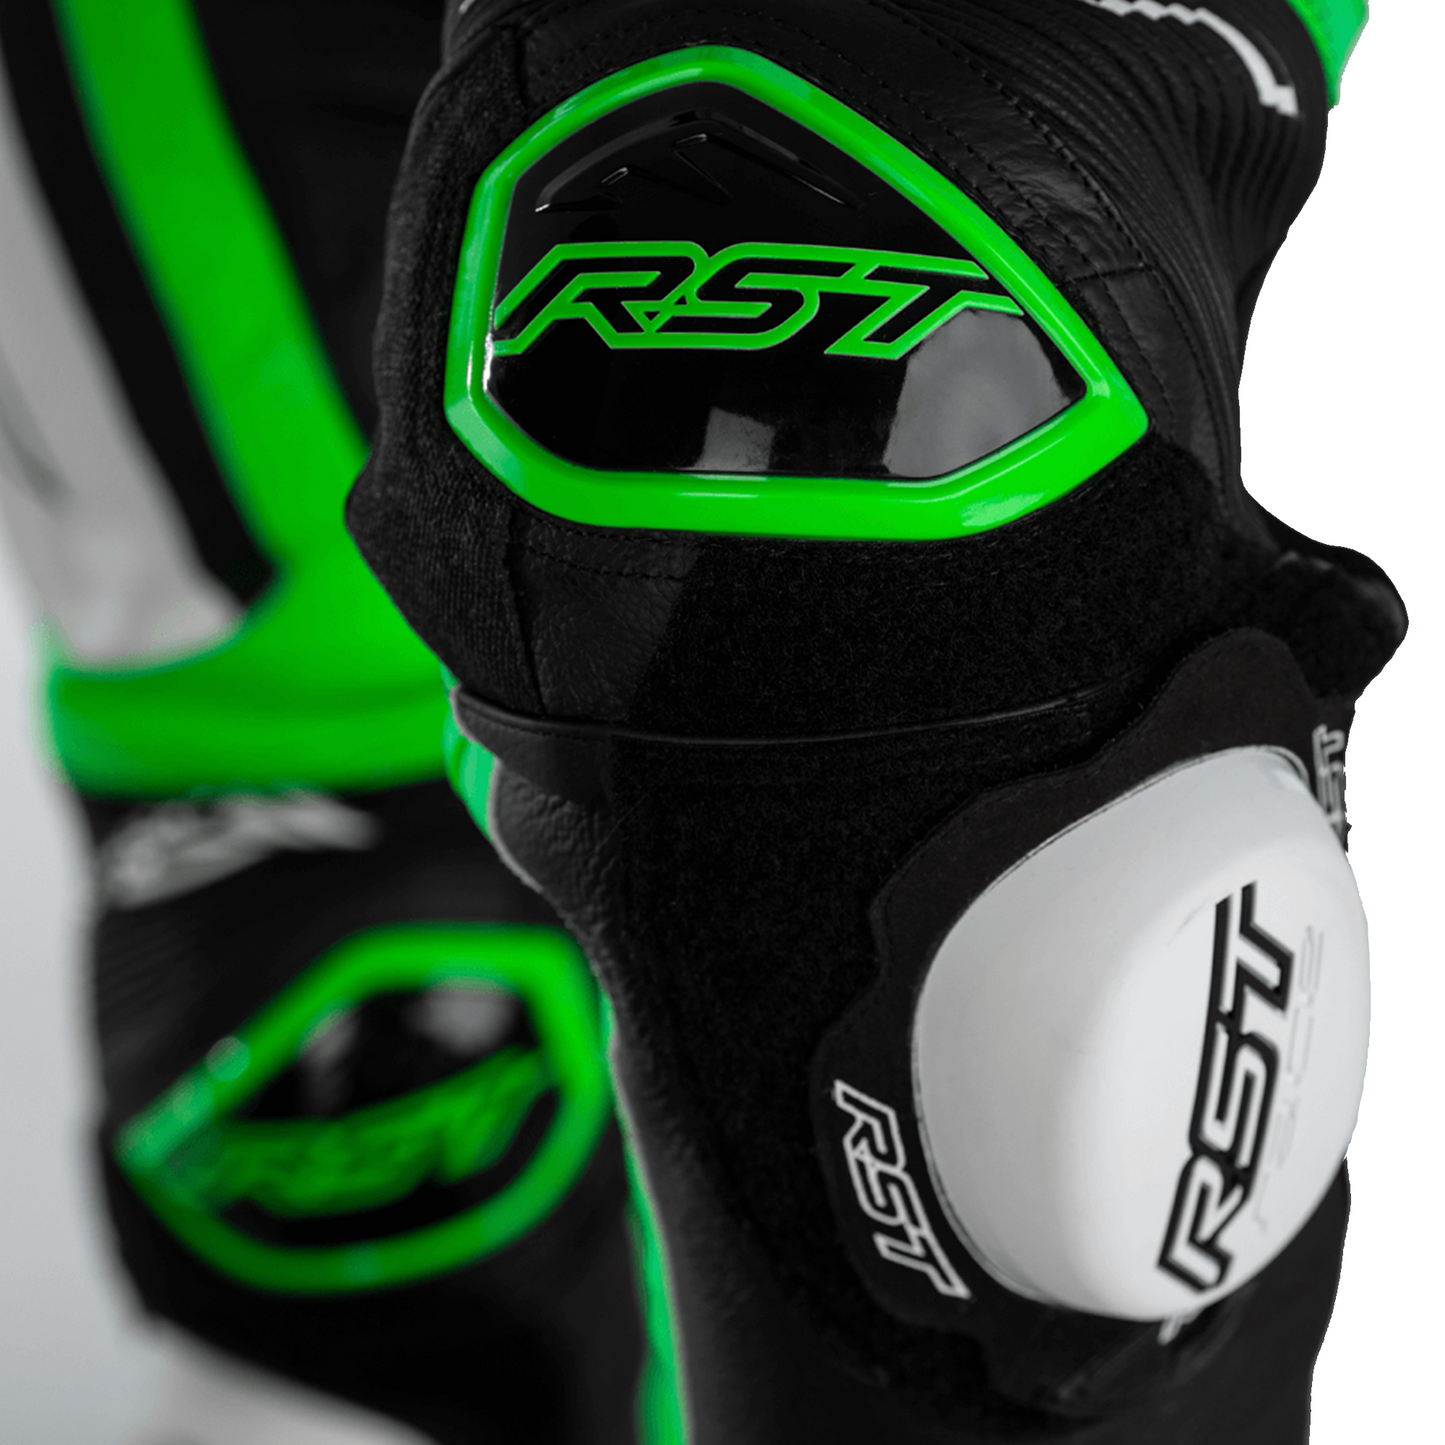 RST Pro Series Airbag (CE) One Piece Leather Suit - Neon Green (2520)